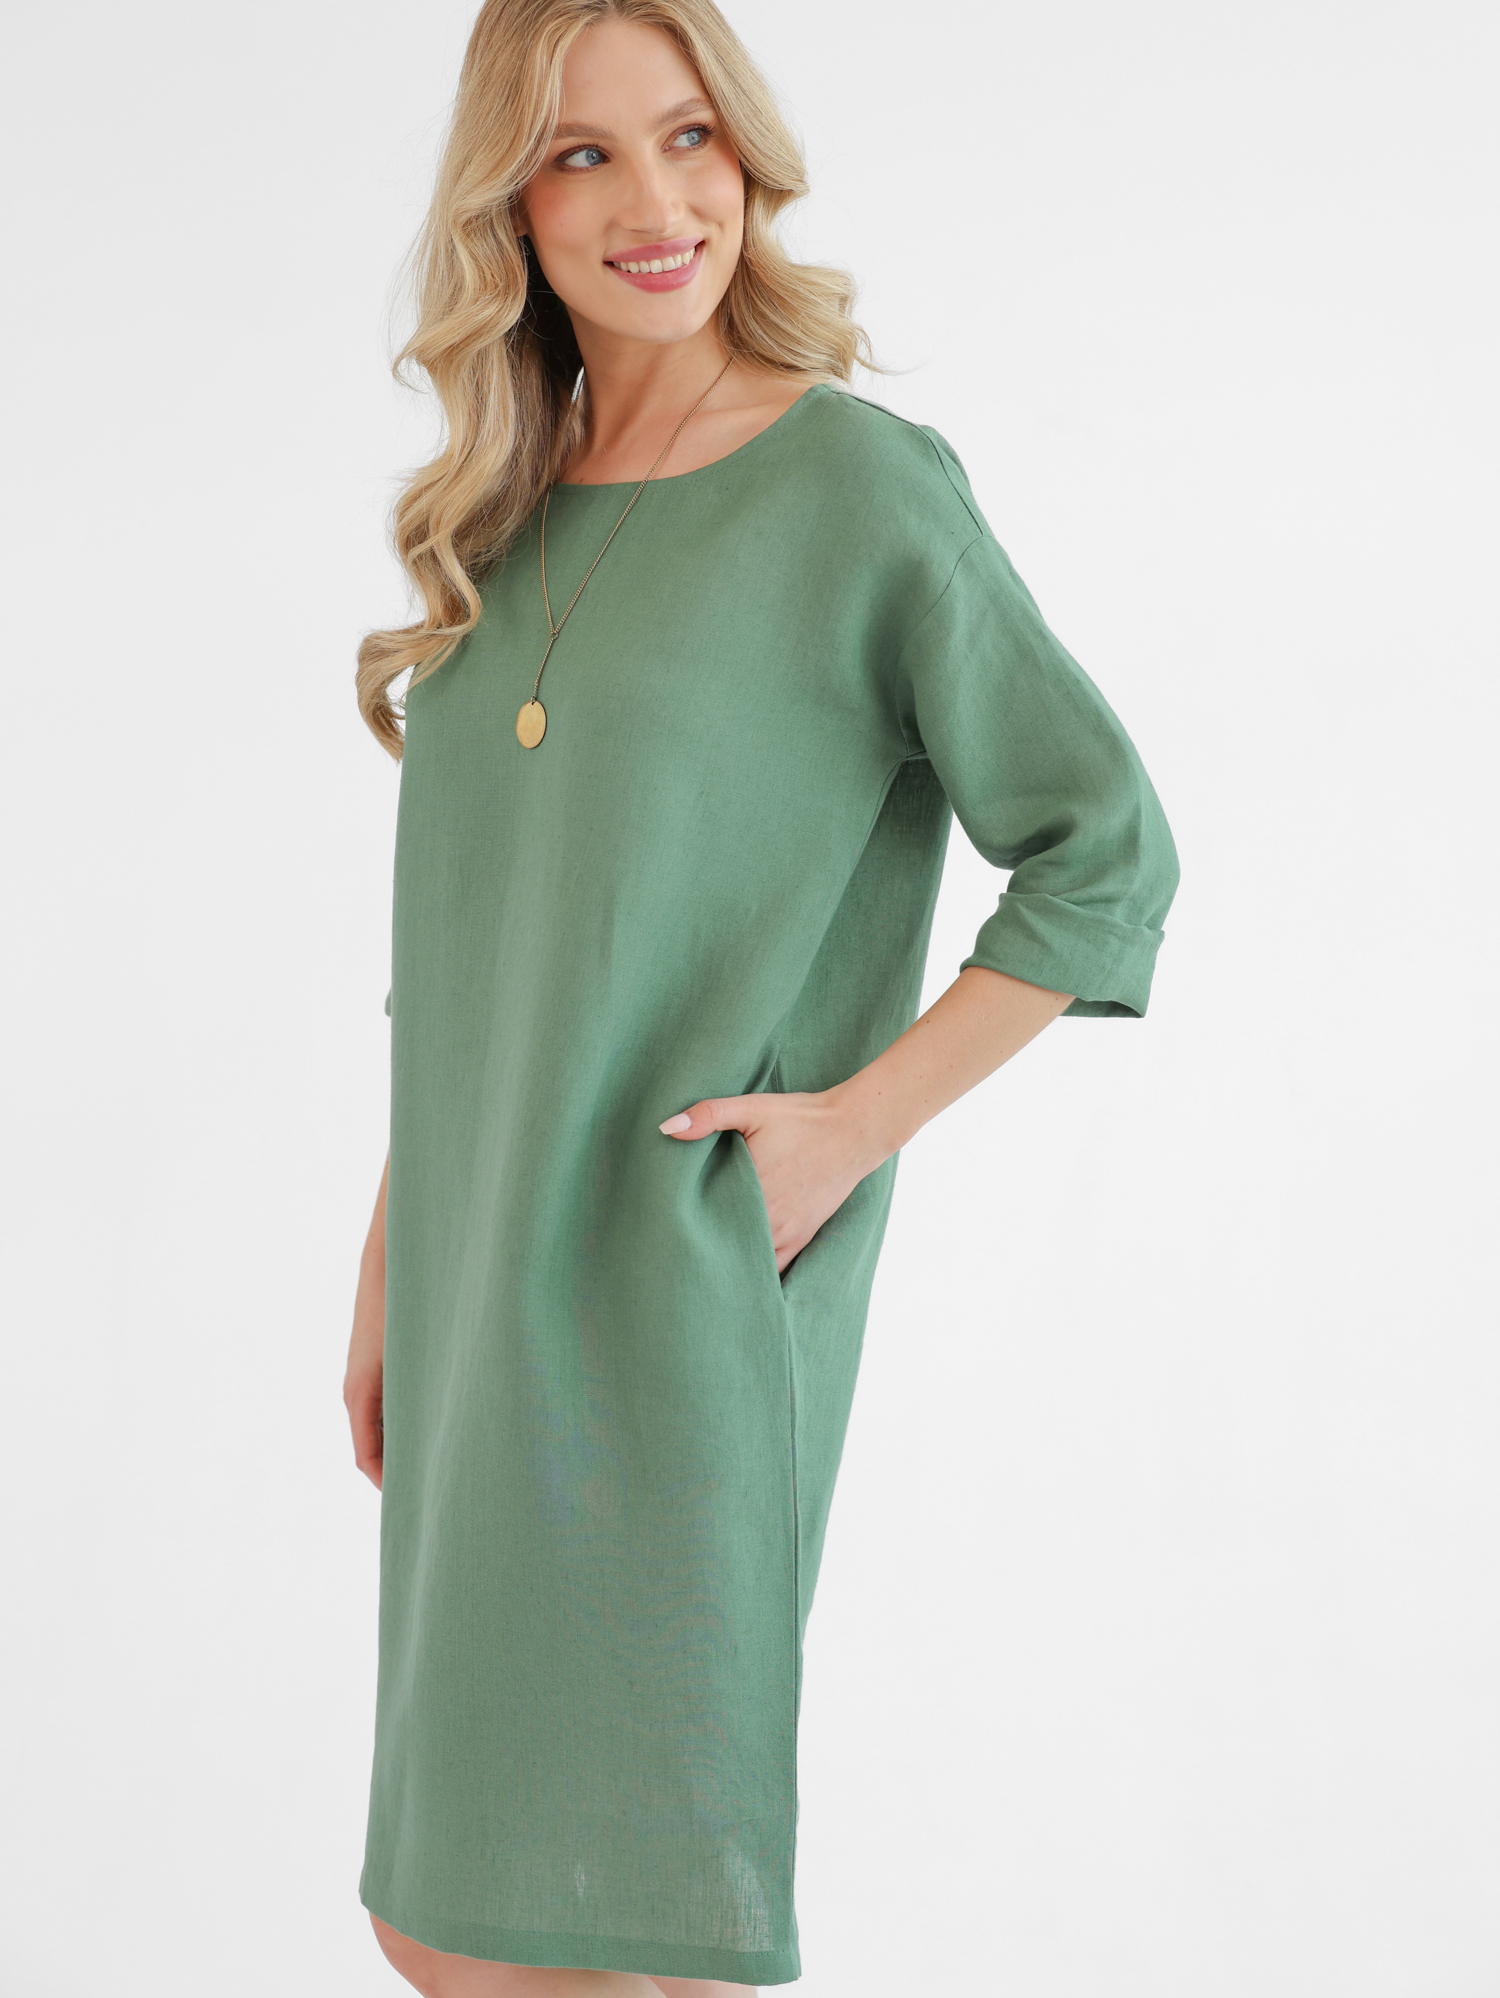 Linen dress with long sleeves